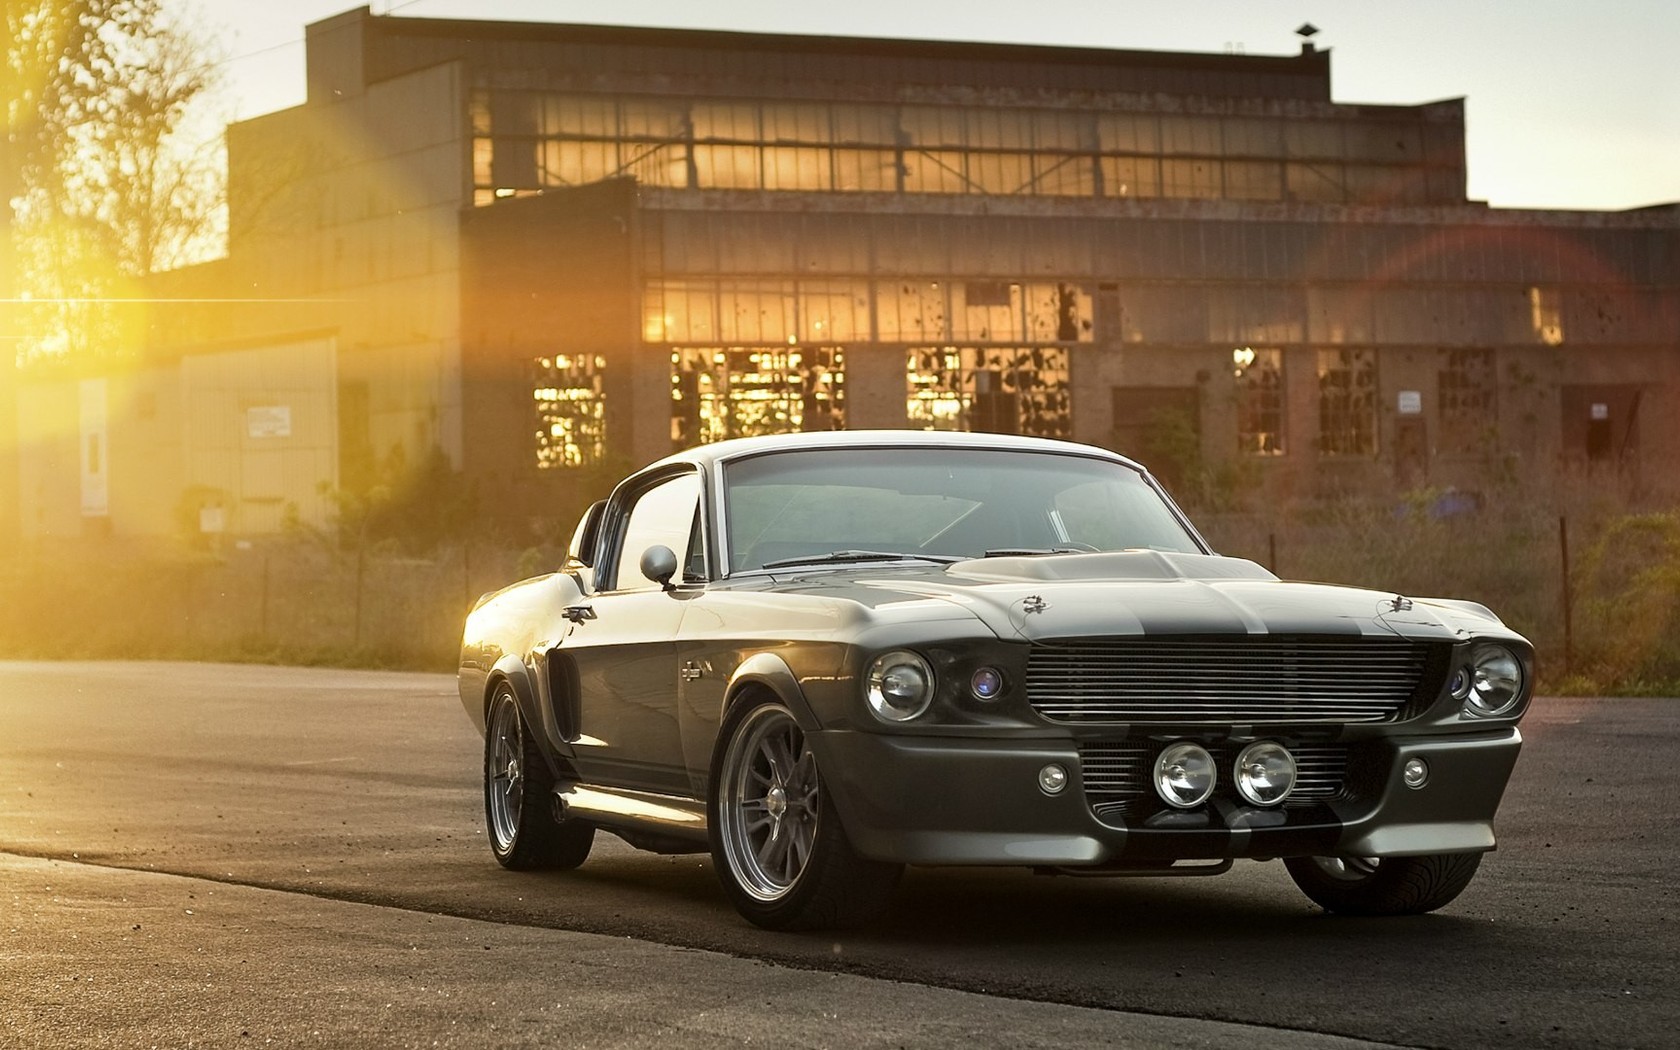 Ford Mustang Shelby Gt Wallpaper